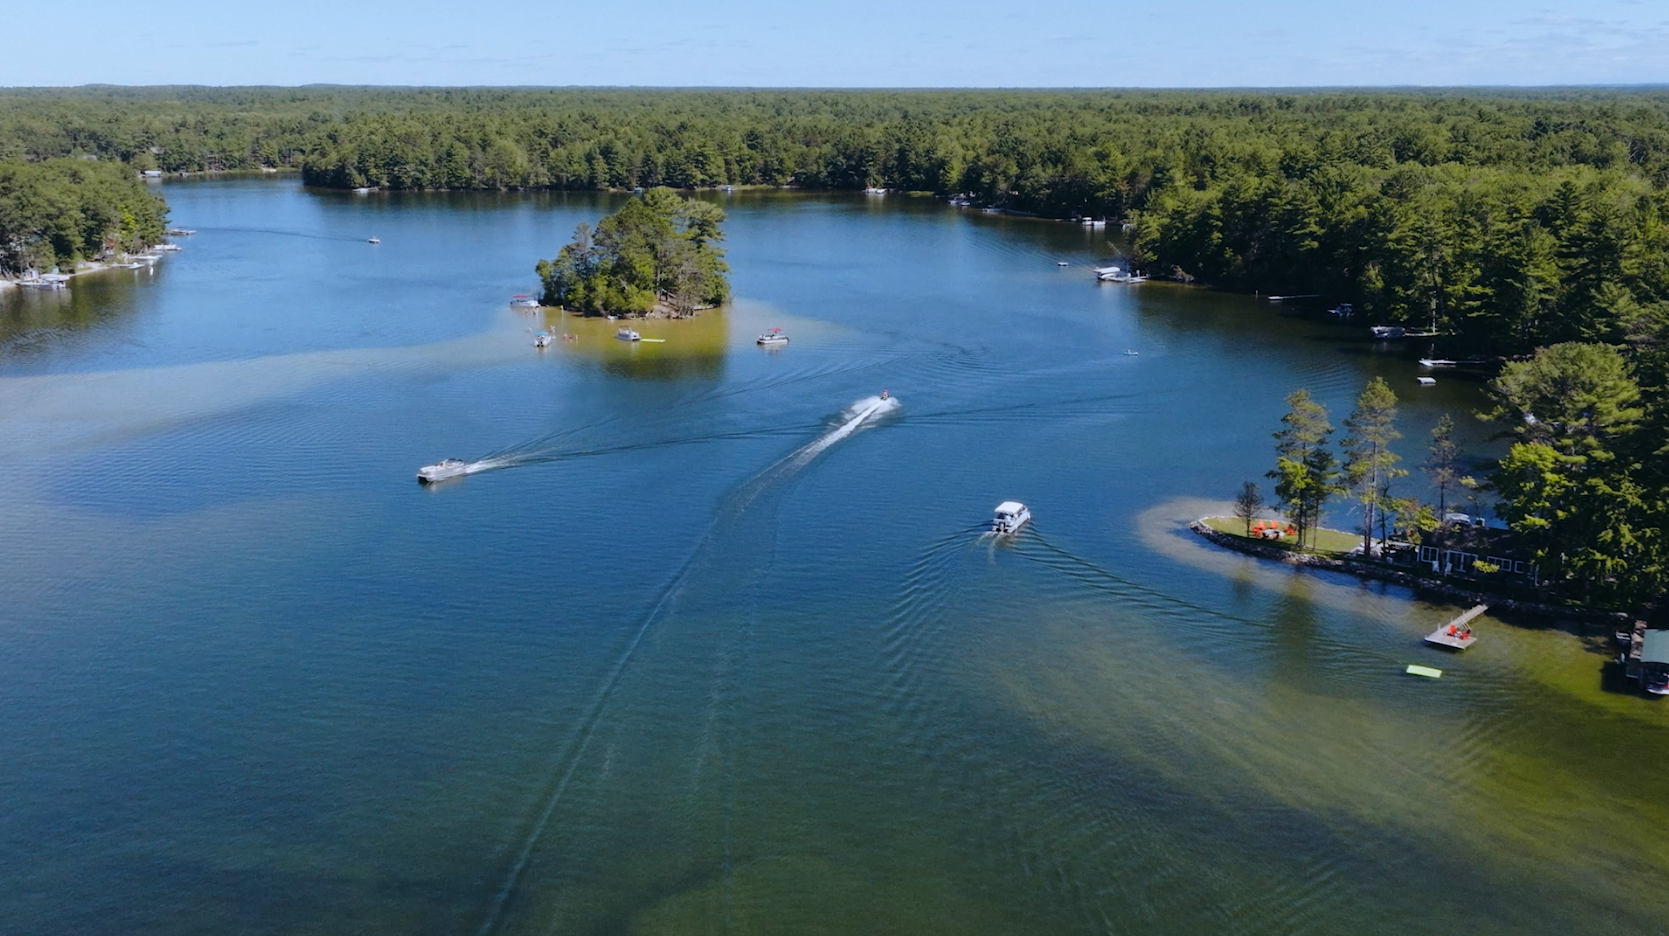 Sights and Sounds Drone Edition: A Multi-Stop Flight Over Traverse City